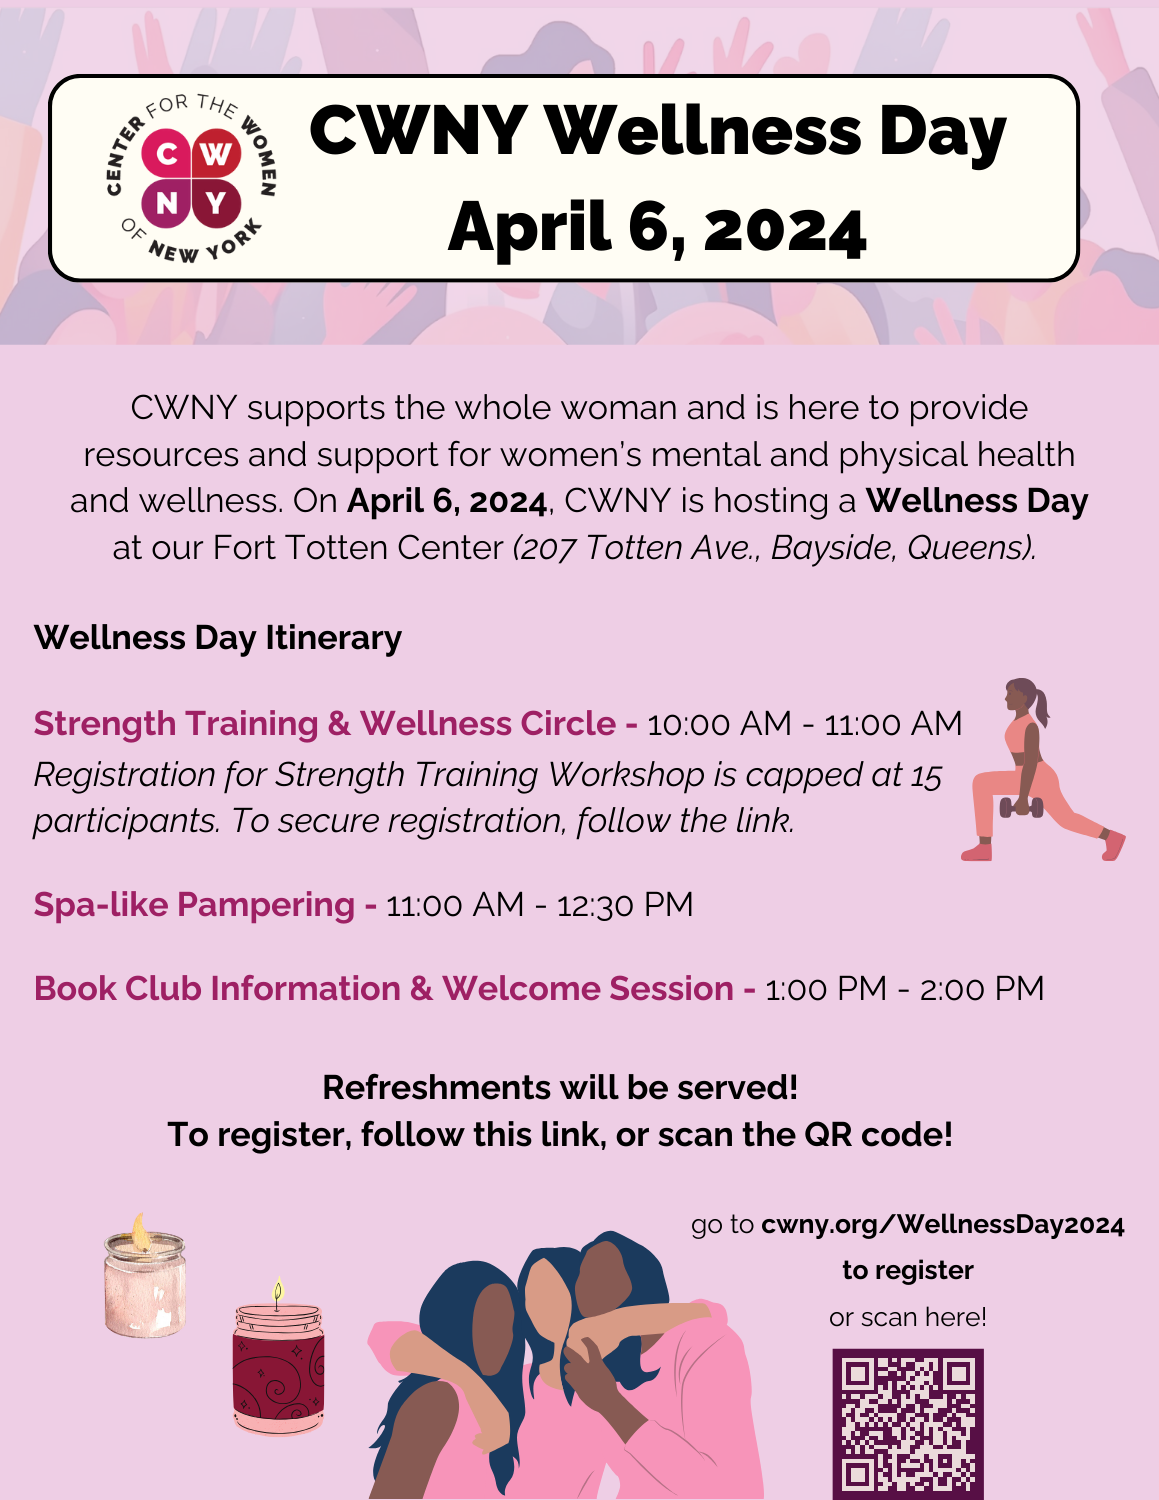 CWNY Wellness Day
Saturday, April 6, 2024
10 AM - 2 PM
In-person: Fort Totten Park, 207 Totten Avenue, Bayside, NY 11359
Register

CWNY supports the whole woman and is here to provide resoruces and support for women’s mental and physical health and wellness. On April 6, 2024, CWNY is hosting a Wellness Day at our Fort Totten Center.

Wellness Day Itinerary:
10:00 AM - 11:00 AM - Strength Training & Wellness Circle (Registration for Strength Training Workshop is capped at 15 participants. To secure registration, follow the link.)
11:00 AM - 12:30 PM - Spa-like Pampering
1:00 PM - 2:00 PM - Book Club Information & Welcome Session
Refreshments will be served!

For questions and information, please email: events@cwny.org